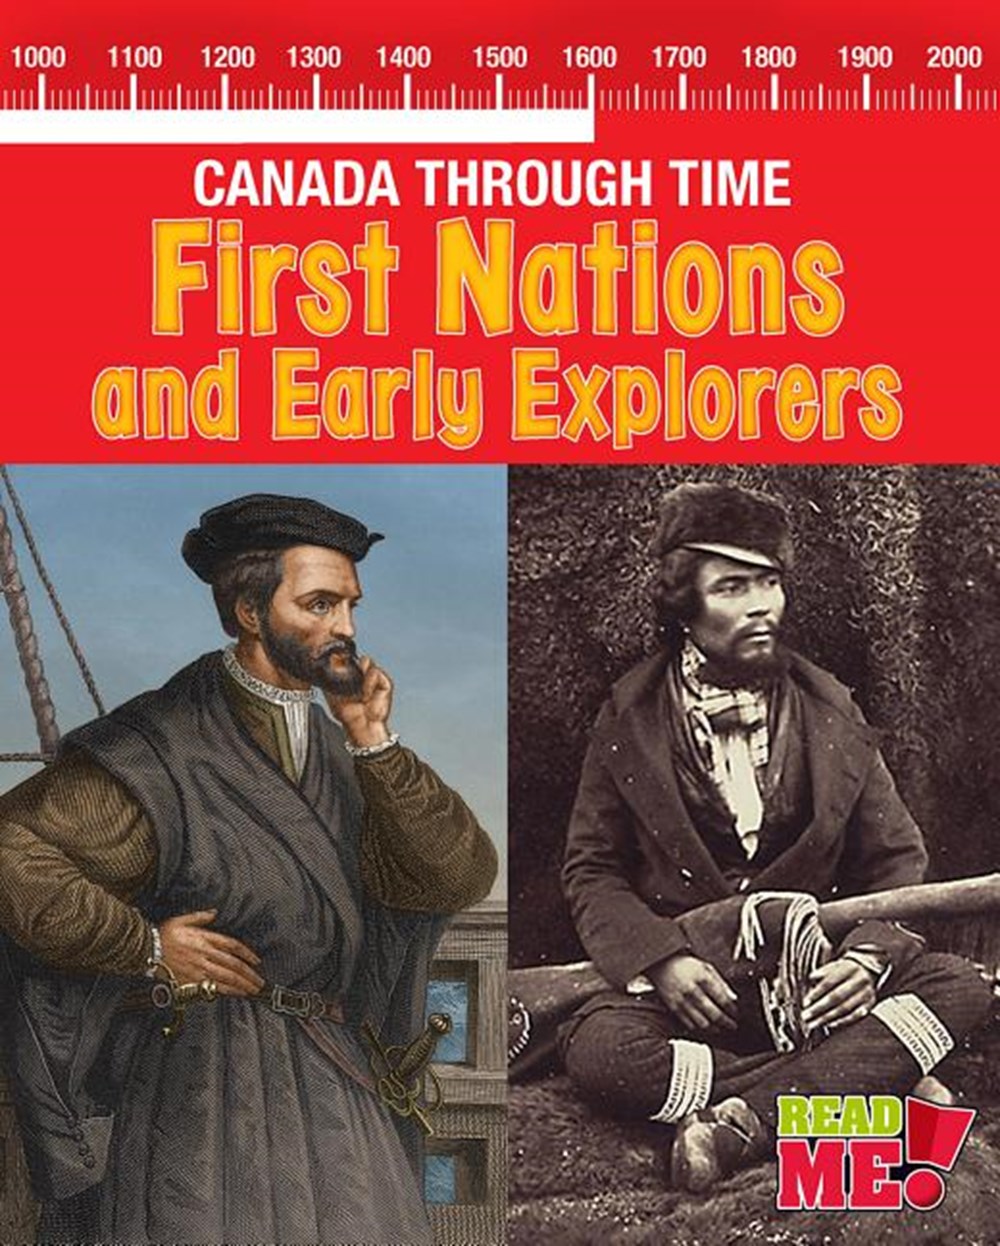 First Nations and Early Explorers